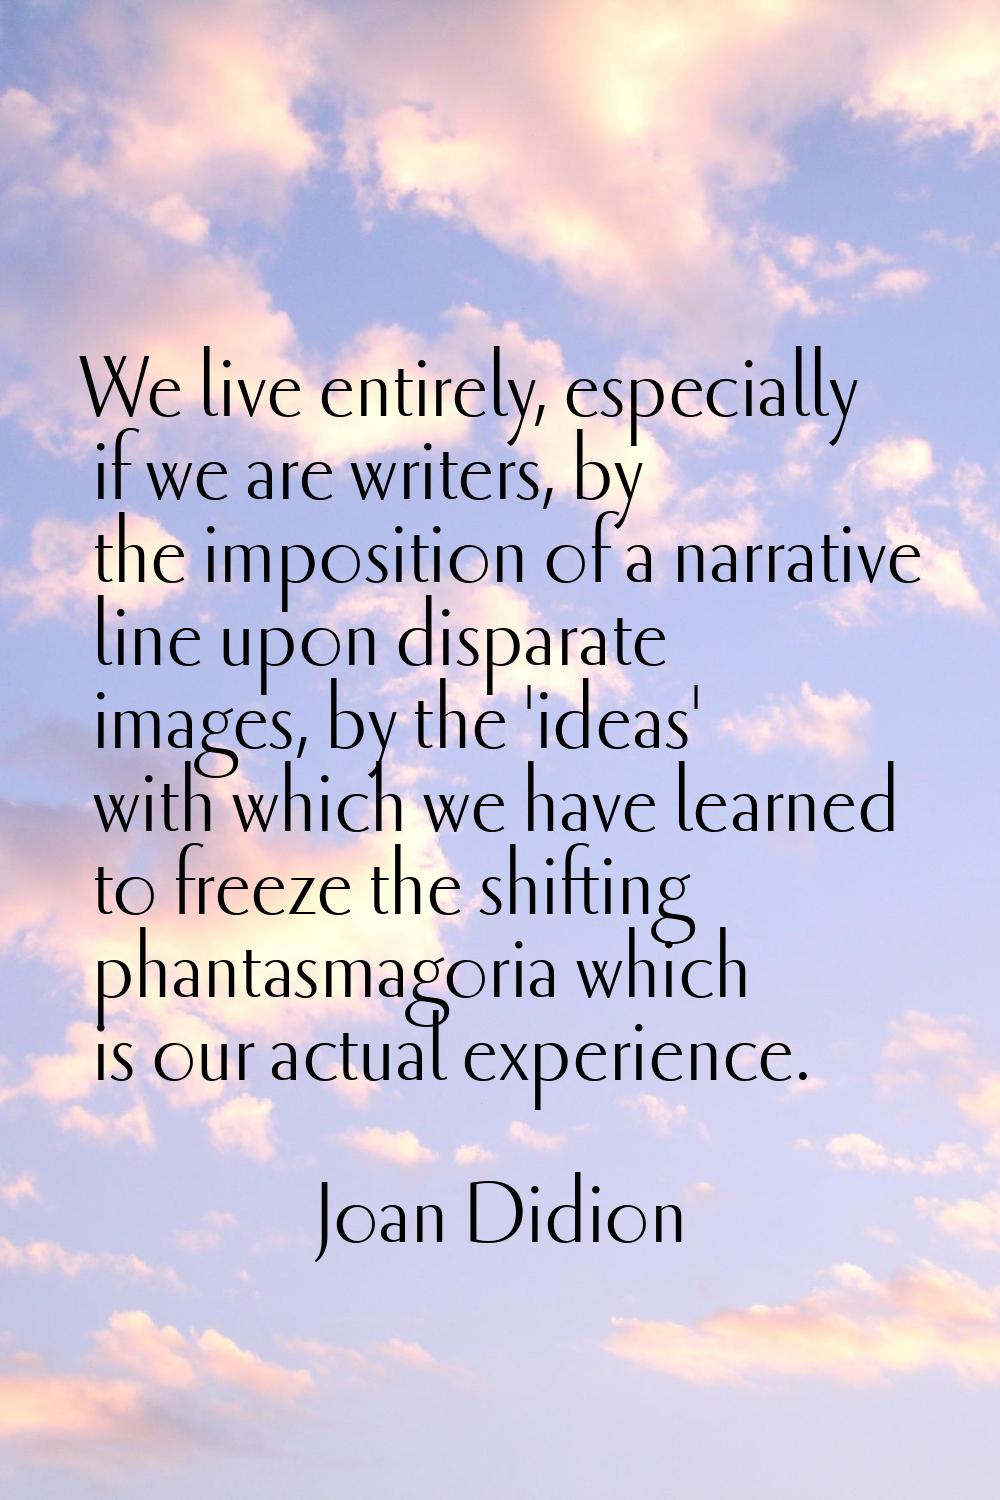 We live entirely, especially if we are writers, by the imposition of a narrative line upon disparat